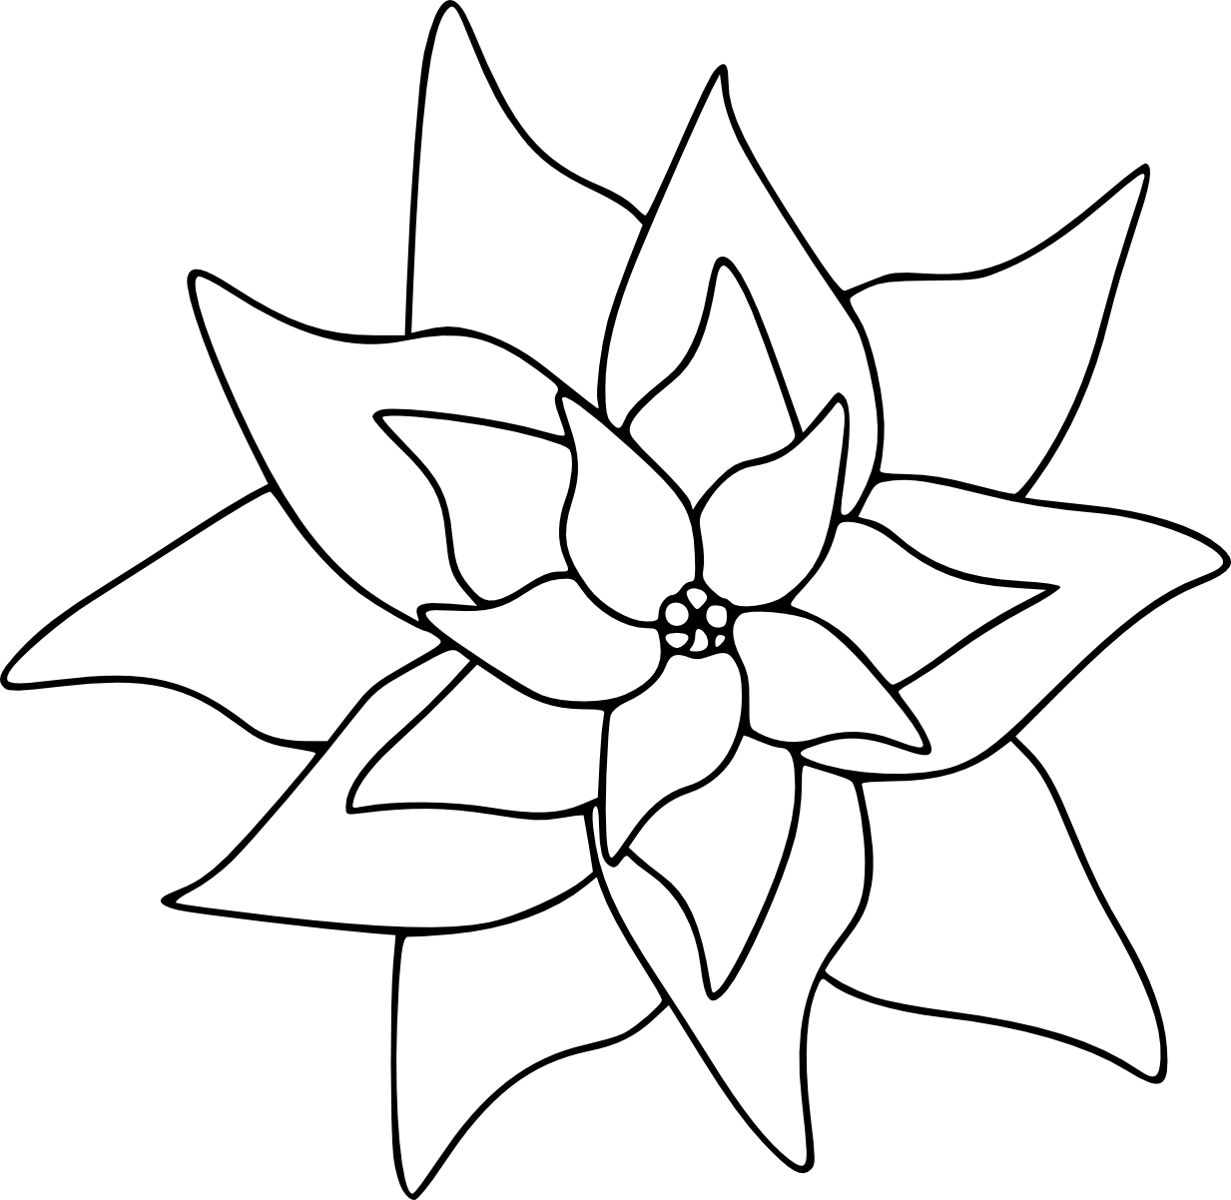 The Poinsettia Image In This Free Digital Stamp Is - Poinsettia Clip Art Free (1231x1200)